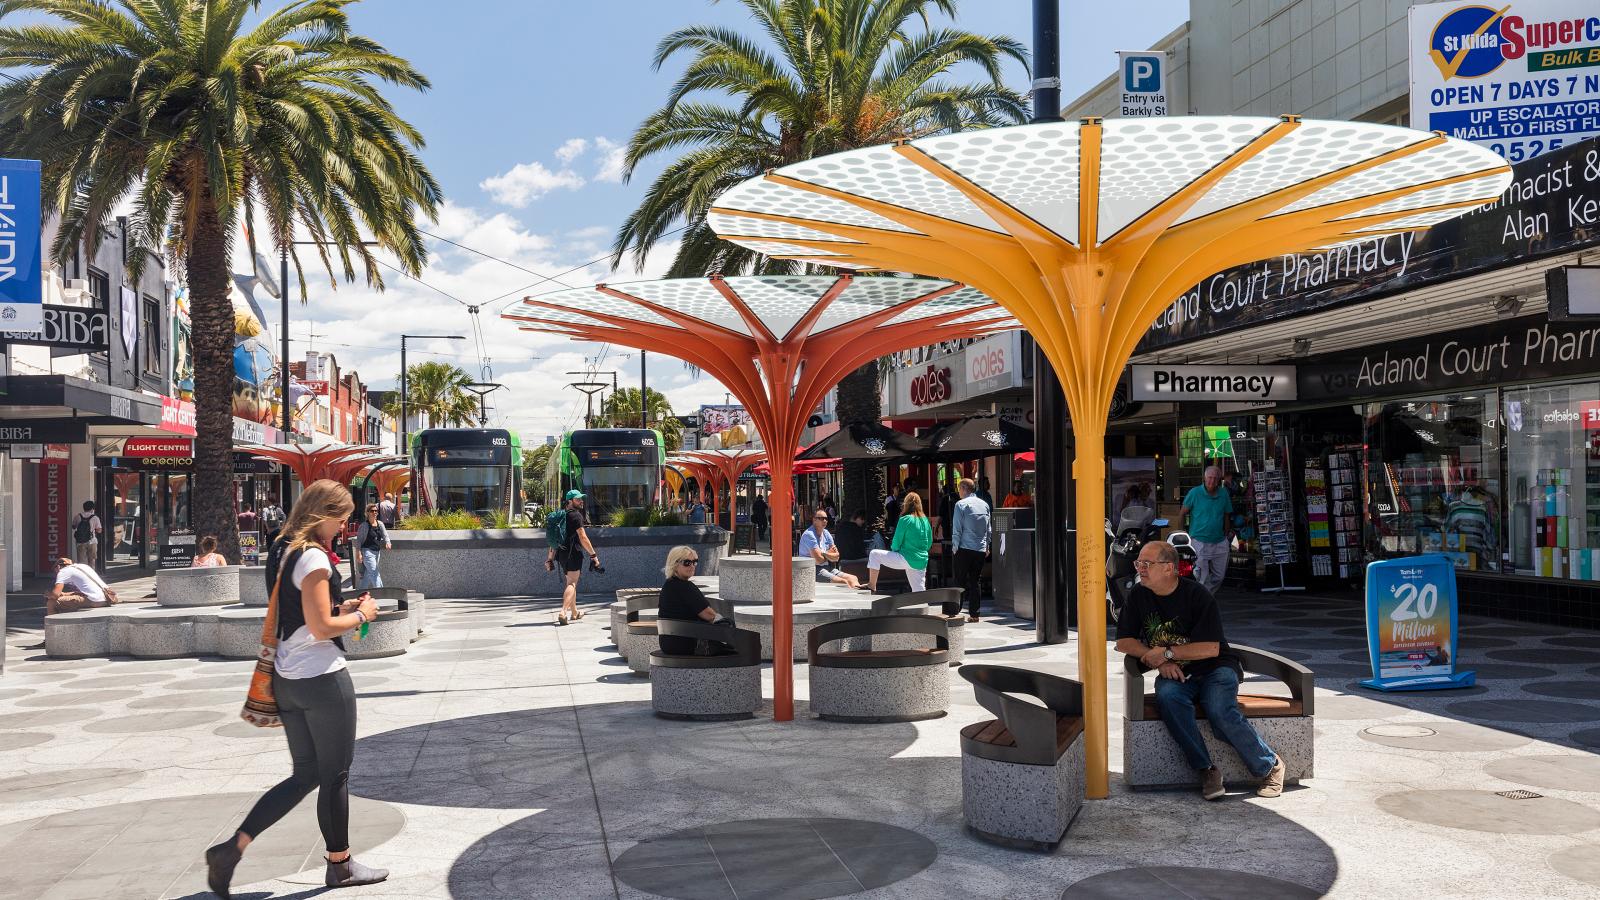 A bustling urban street scene on Acland Street, St Kilda, featuring people walking and sitting beneath modern, umbrella-shaped shade structures. In the background, two trams are visible, and shops including a pharmacy and a convenience store line the street. Palm trees add a tropical vibe.